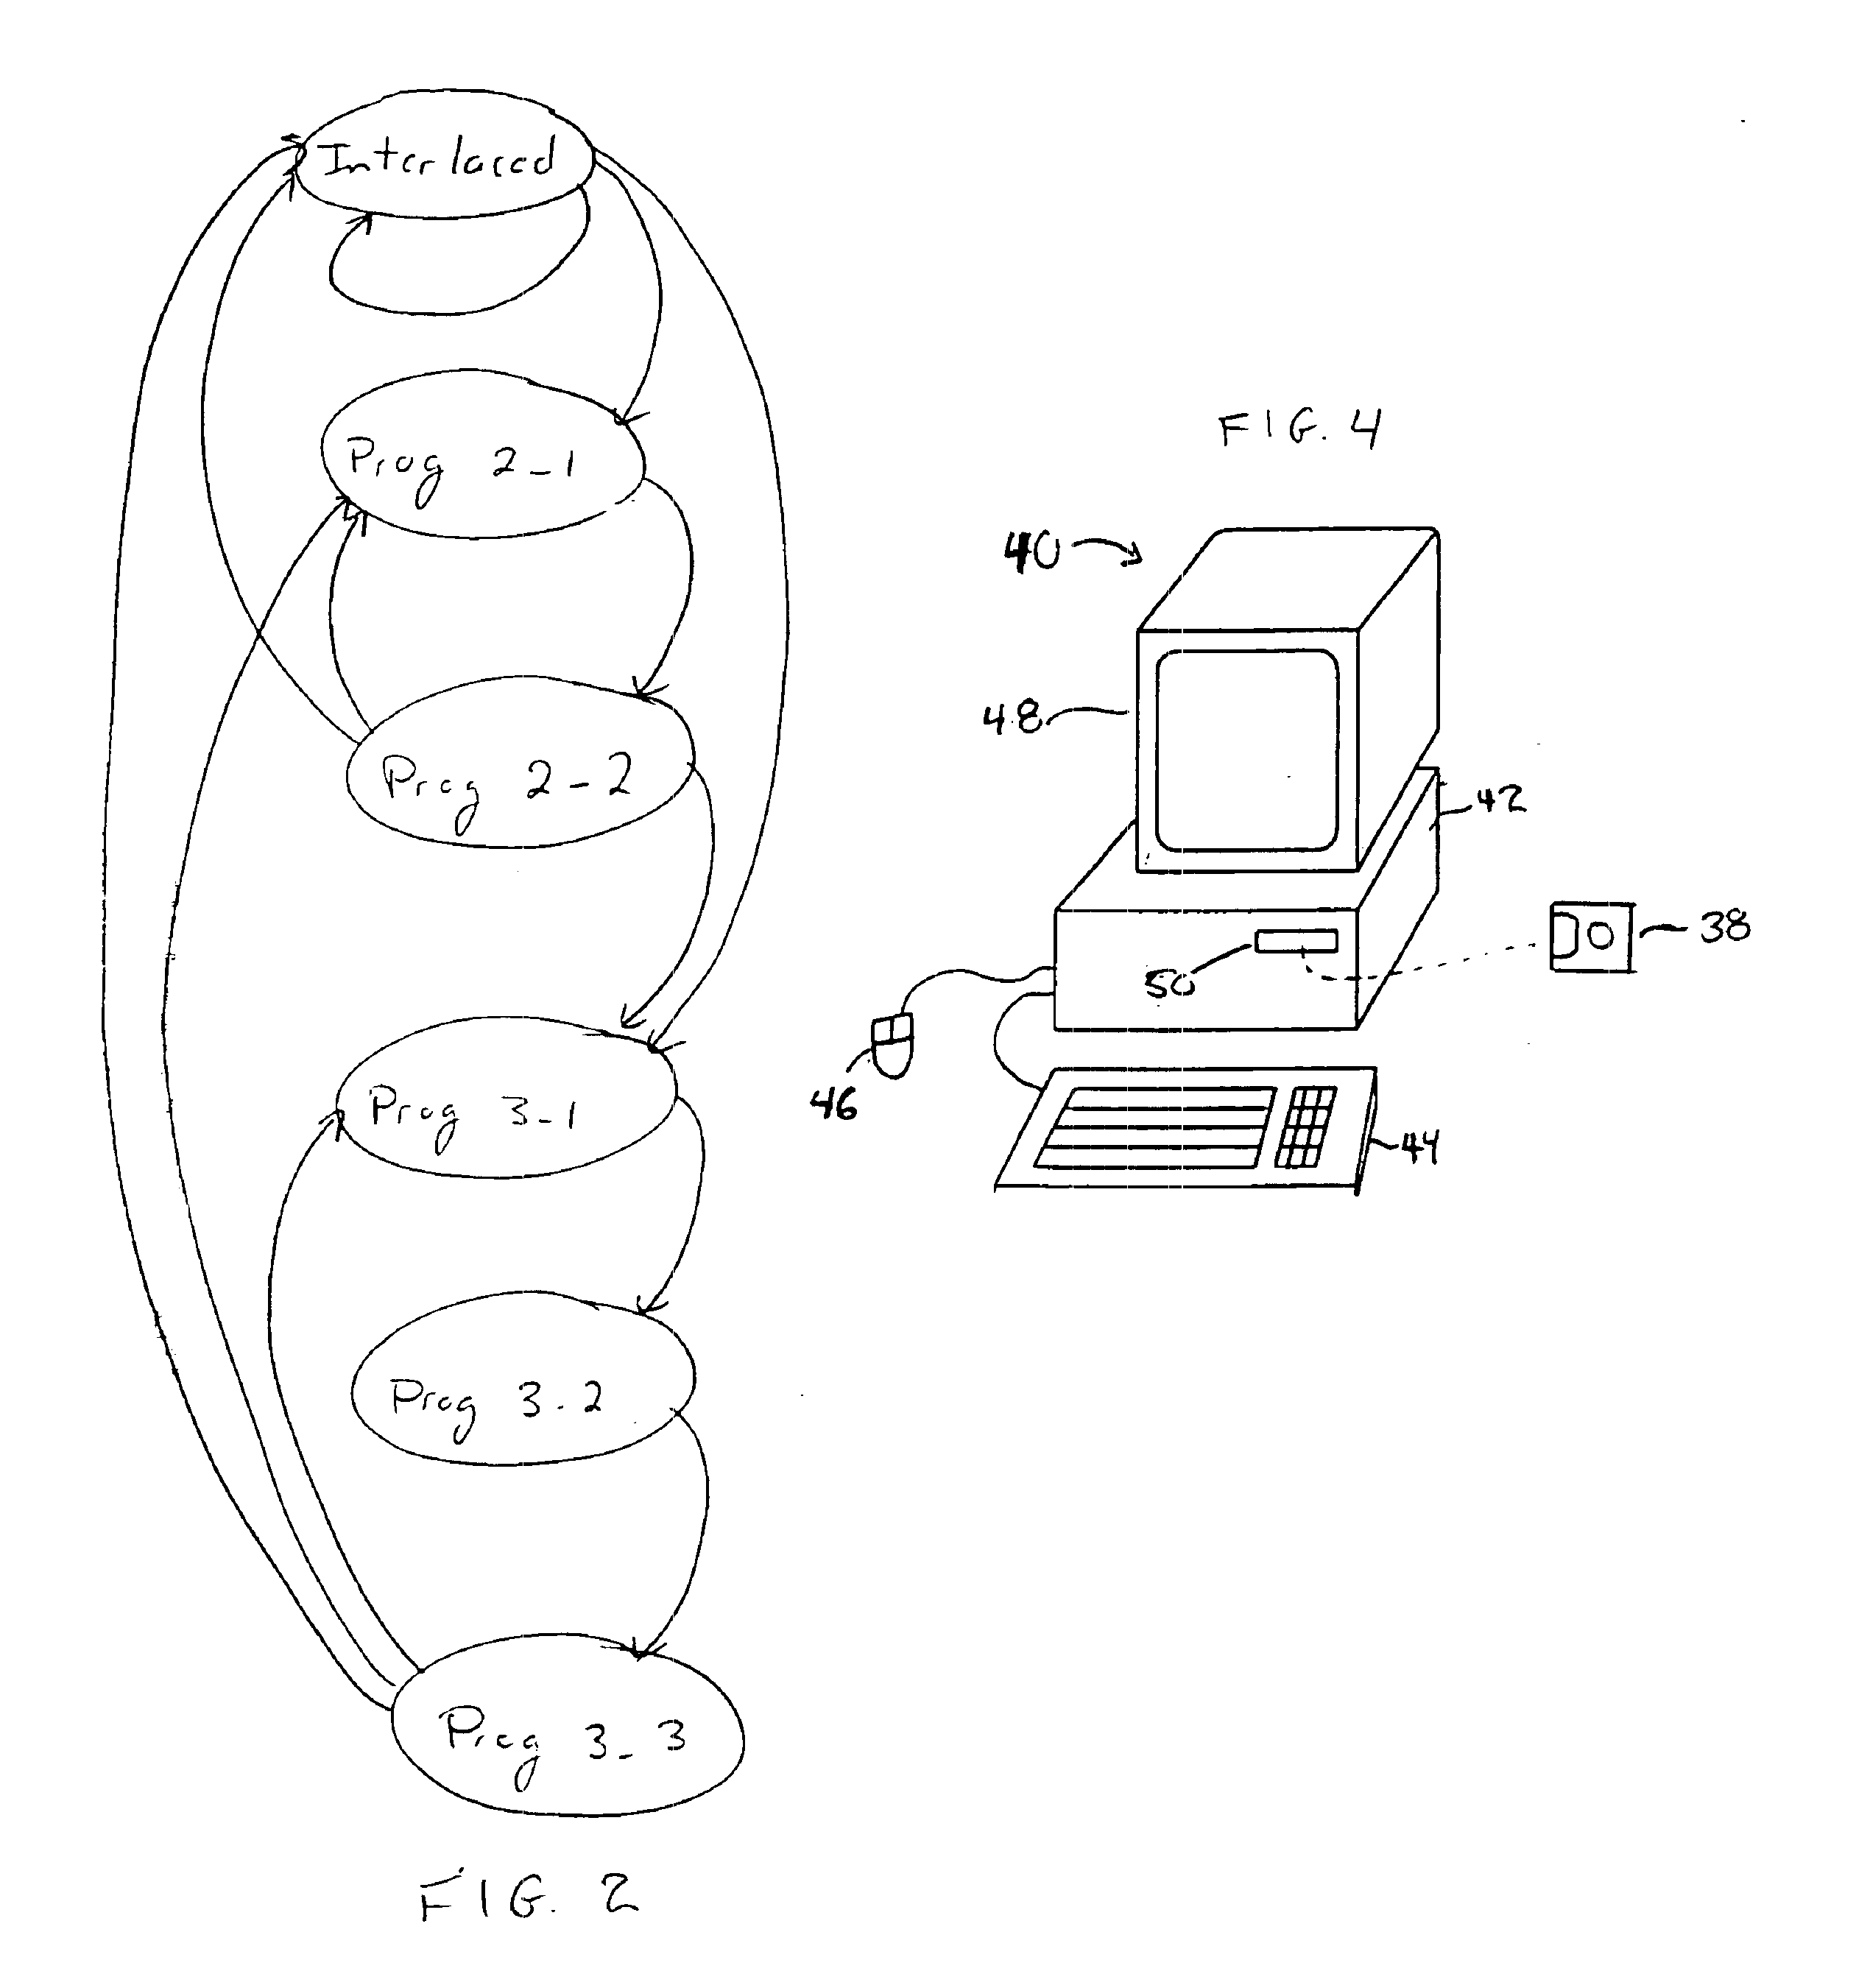 Apparatus for detecting mixed interlaced and progressive original sources in a video sequence